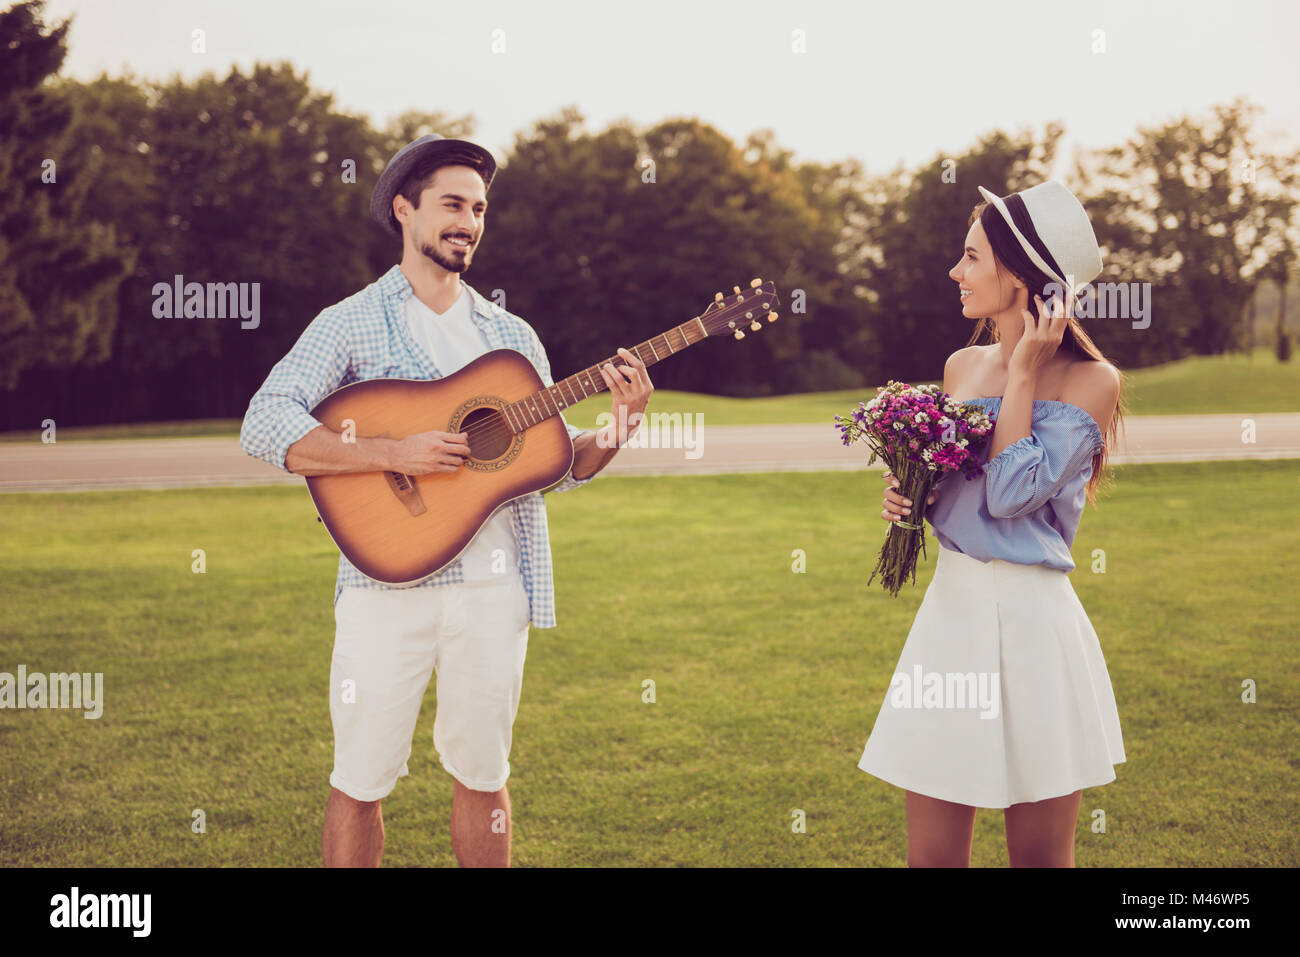 Cute sweet partners on a date outside, well dressed, excited, lovely. Good day, happiness, friendship concept. Lady holds present, guitarist plays ins Stock Photo